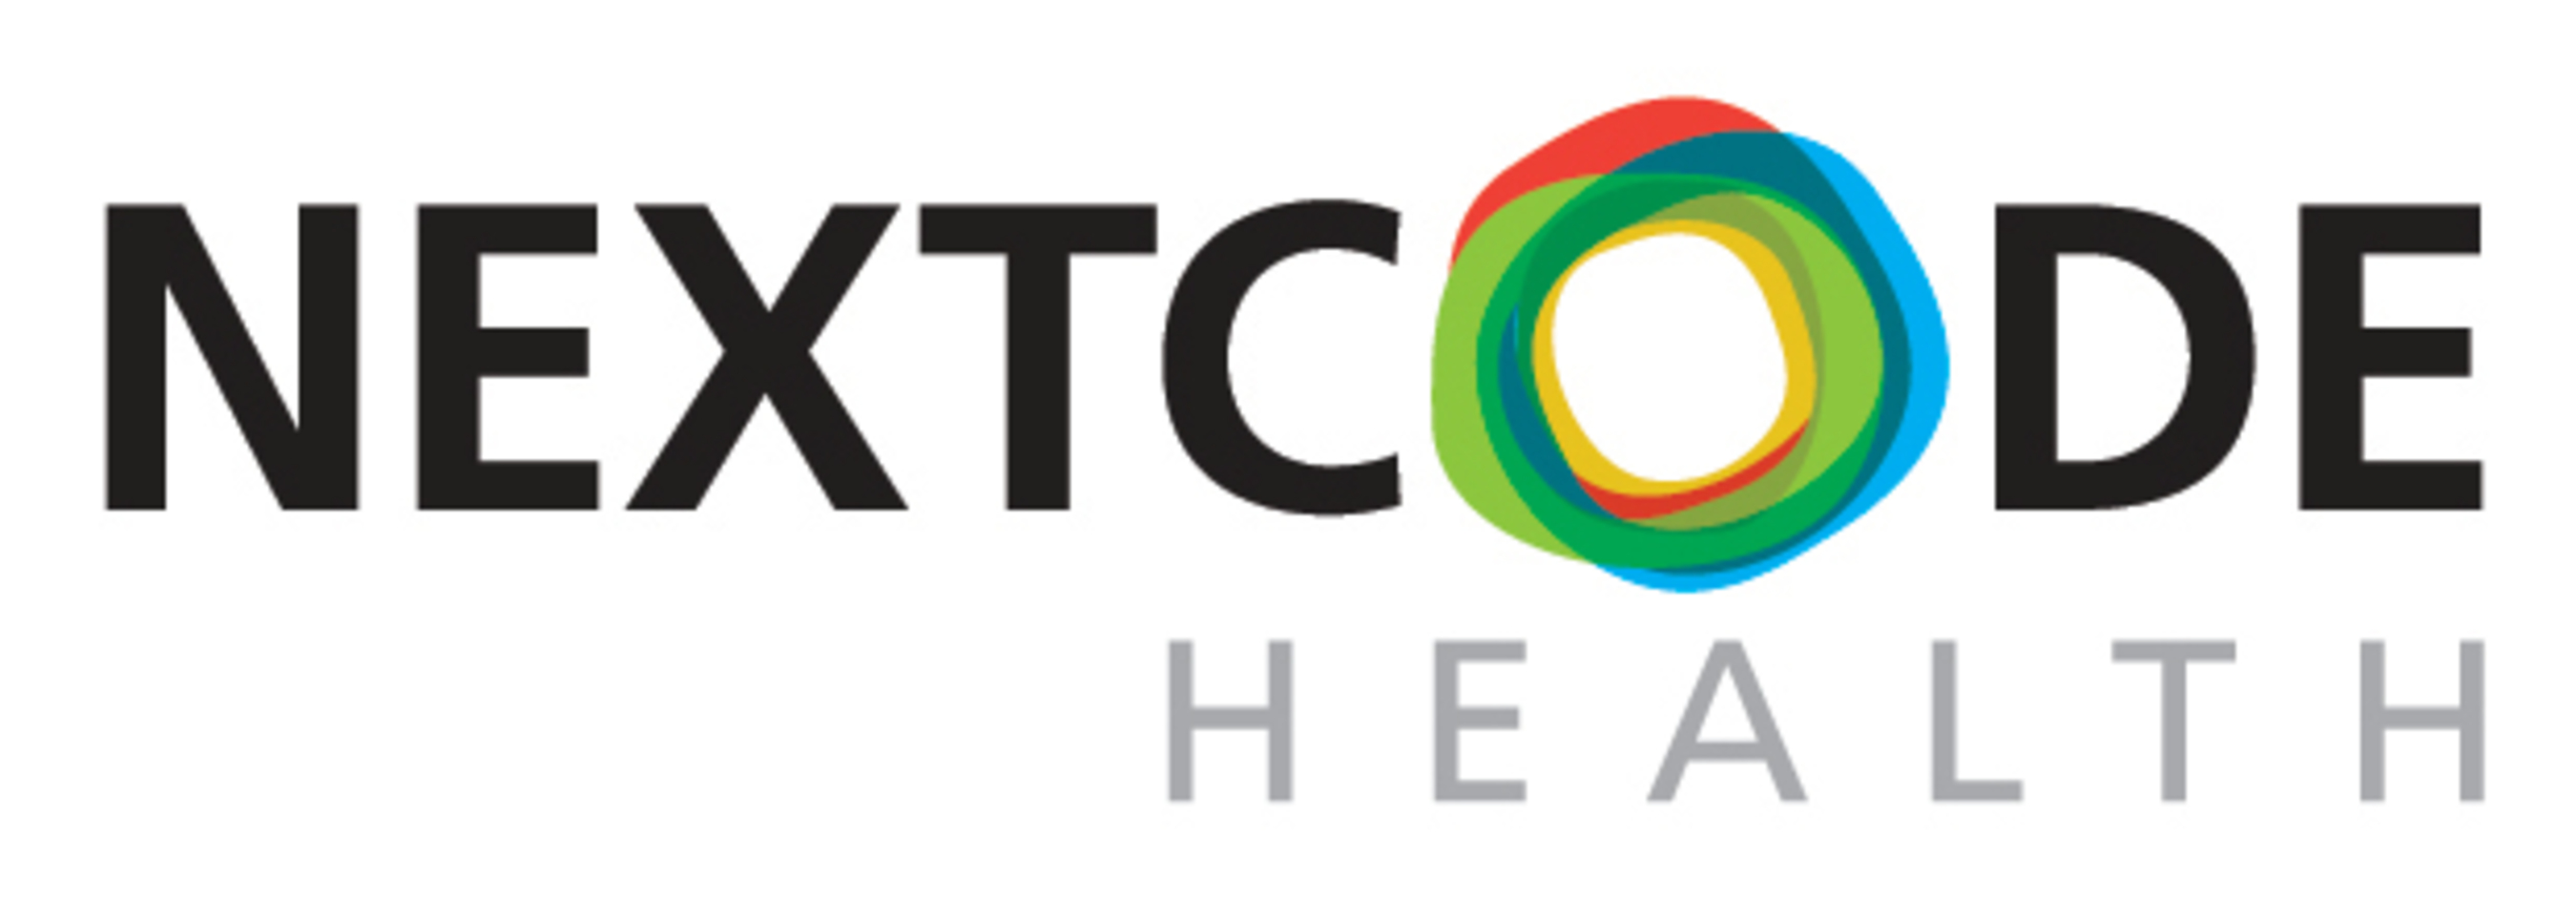 NextCODE puts the world's most proven sequence analysis platform in the hands of clinicians and researchers around the globe, enabling them to use the full power of the genome to better diagnose and treat disease. (PRNewsFoto/NextCODE Health)